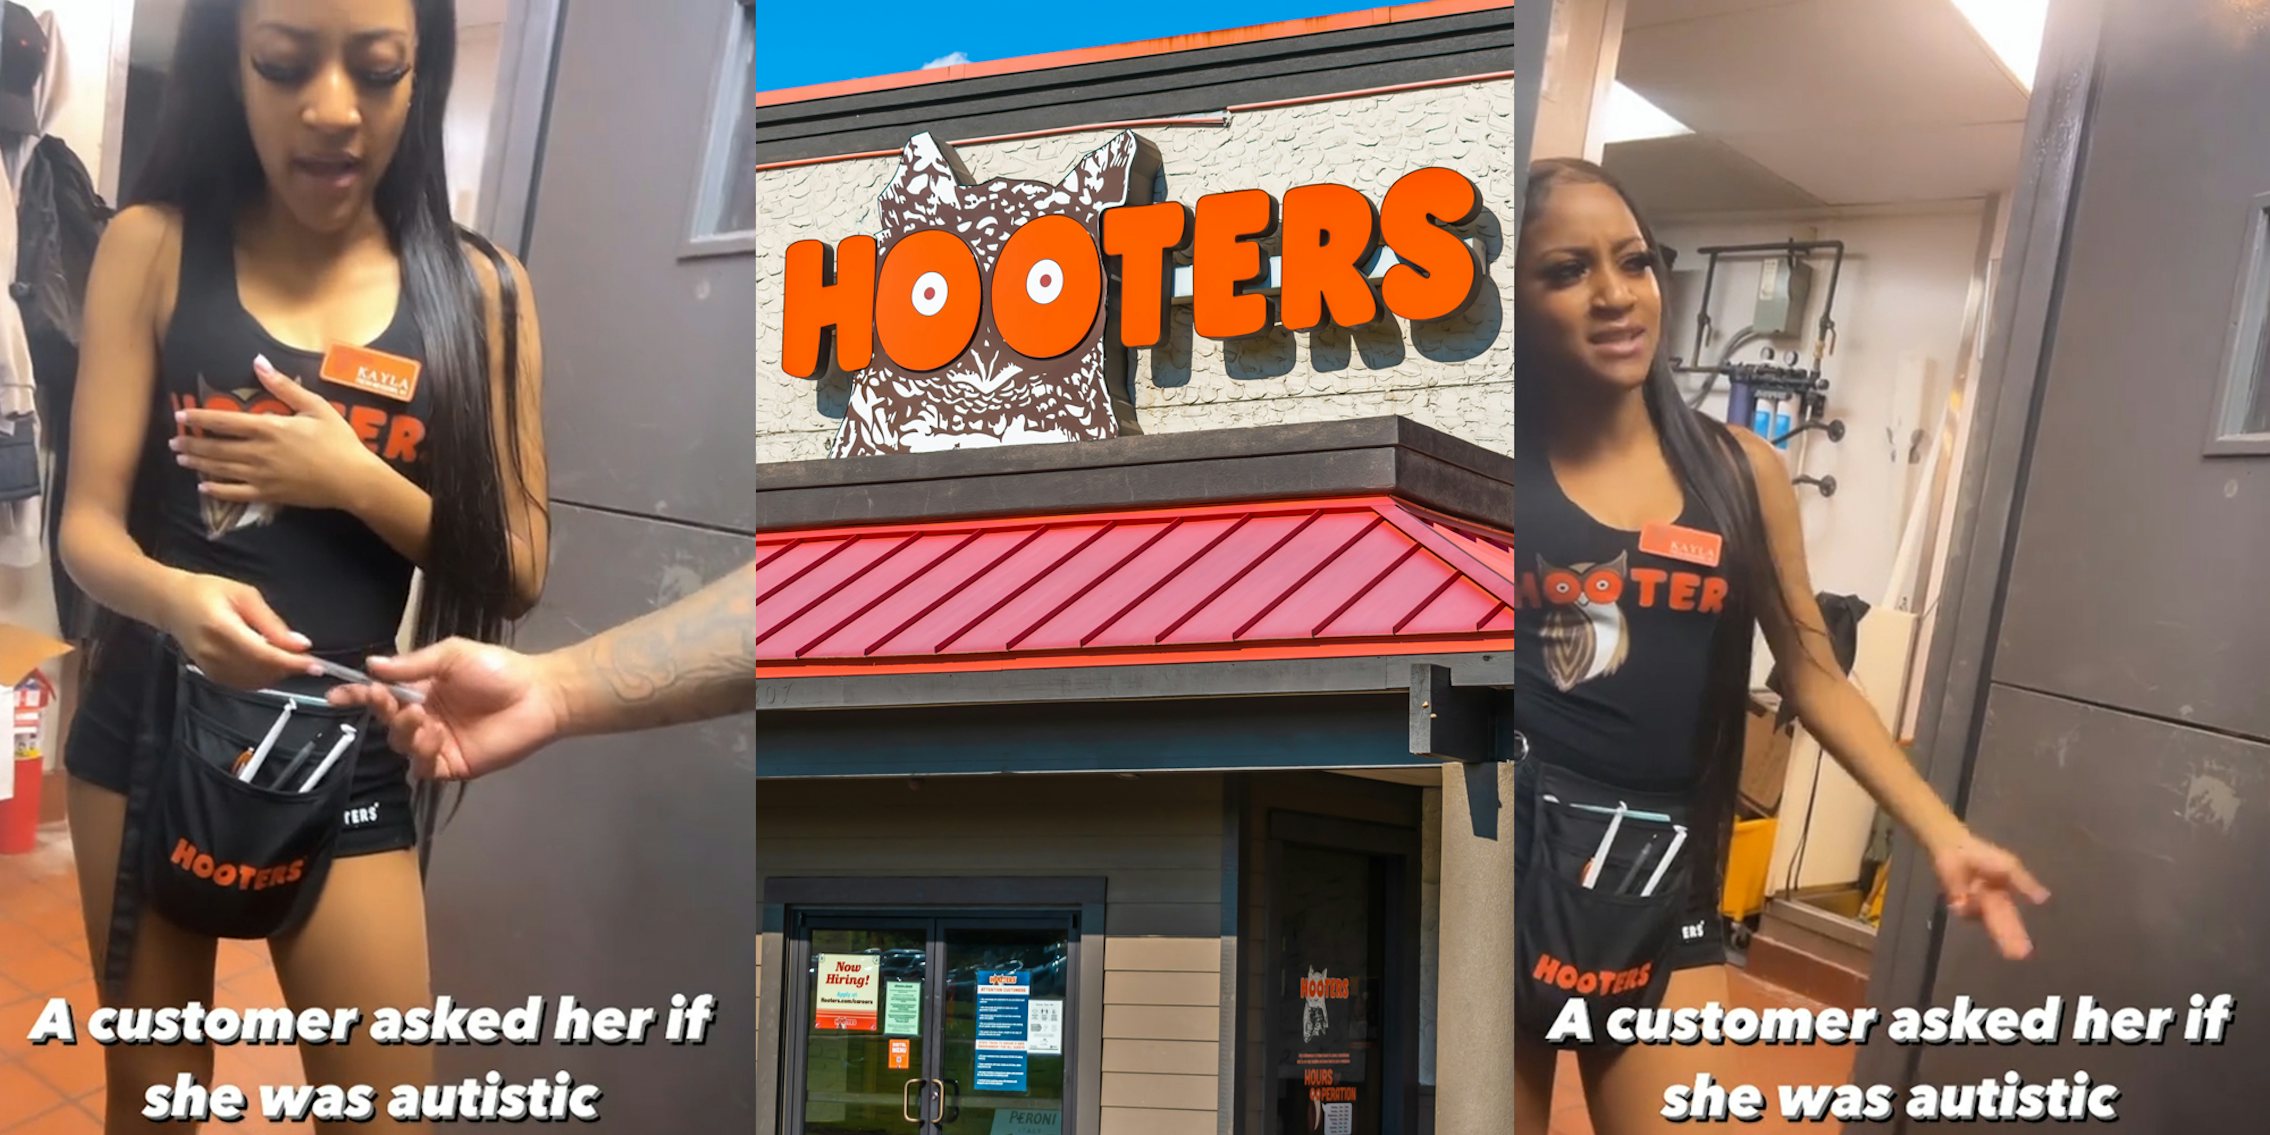 Hooters server speaking with caption 'A customer asked her if she was autistic' (l) Hooters building with sign (c) Hooters server speaking with caption 'A customer asked her if she was autistic' (r)